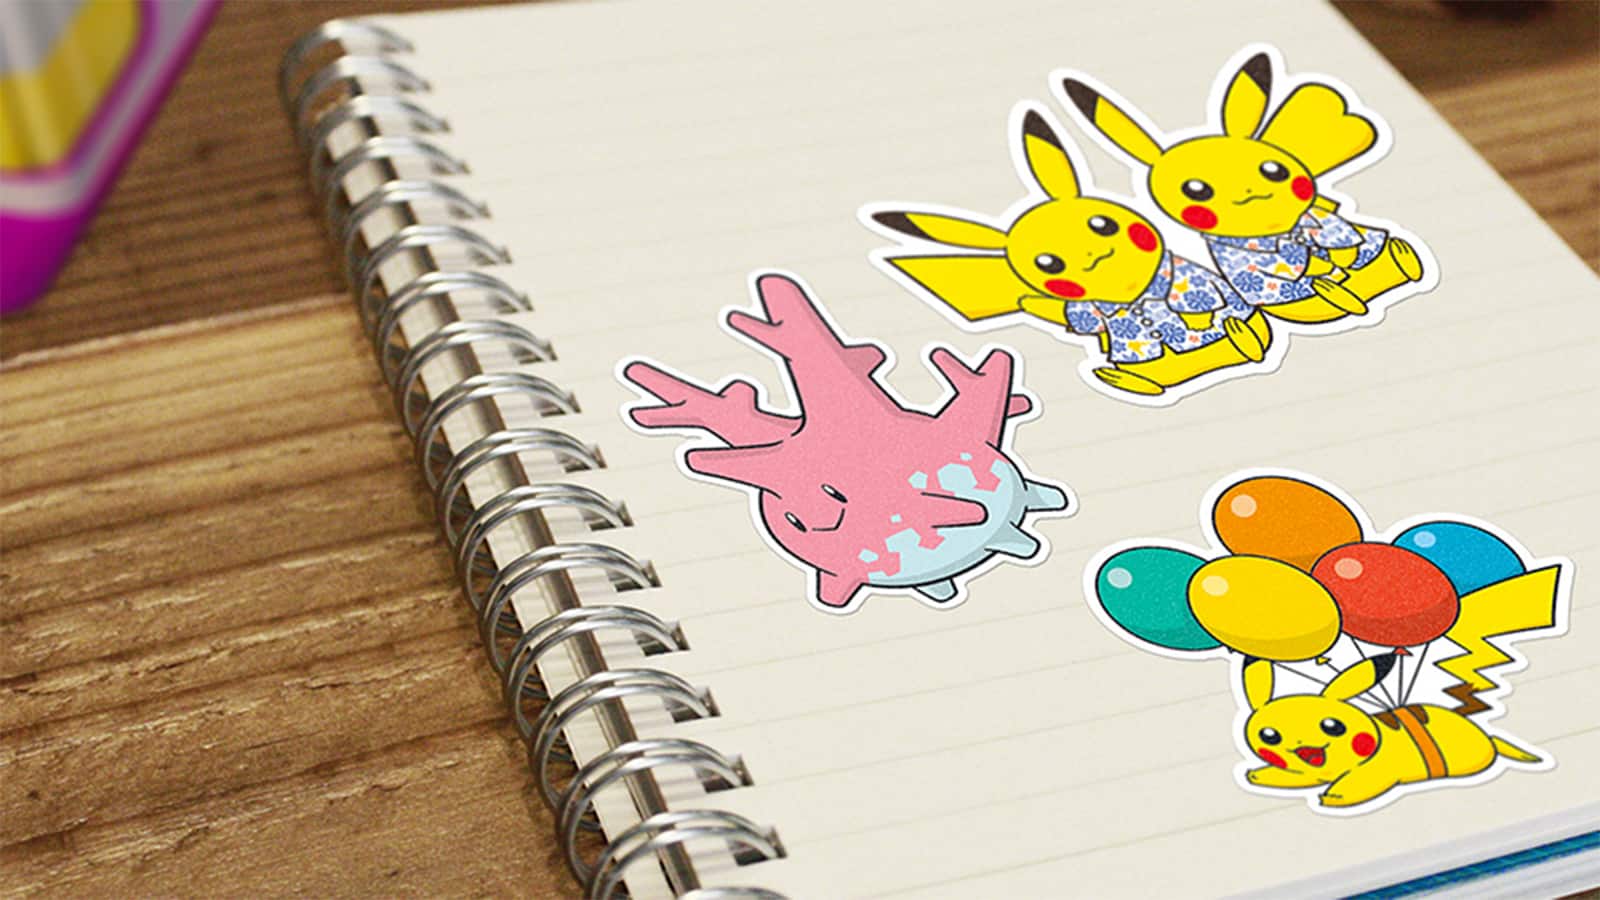 Stickers and bonuses appearing in Pokemon Go Air Adventures event